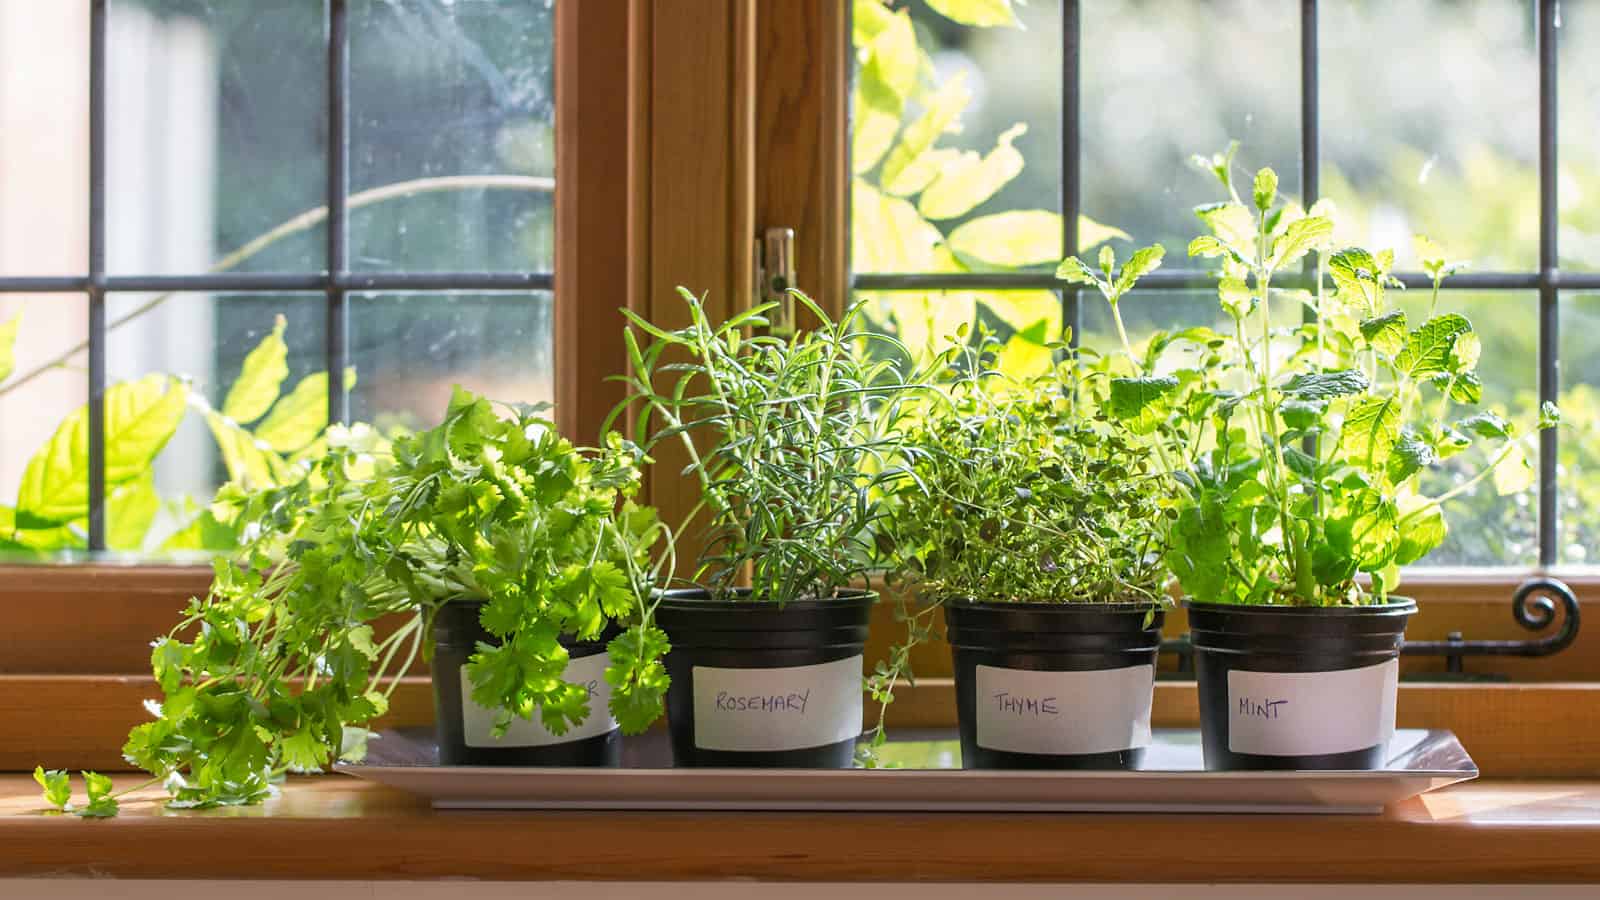 Different kinds herbs planted in small pots placed in the kitchen window sill